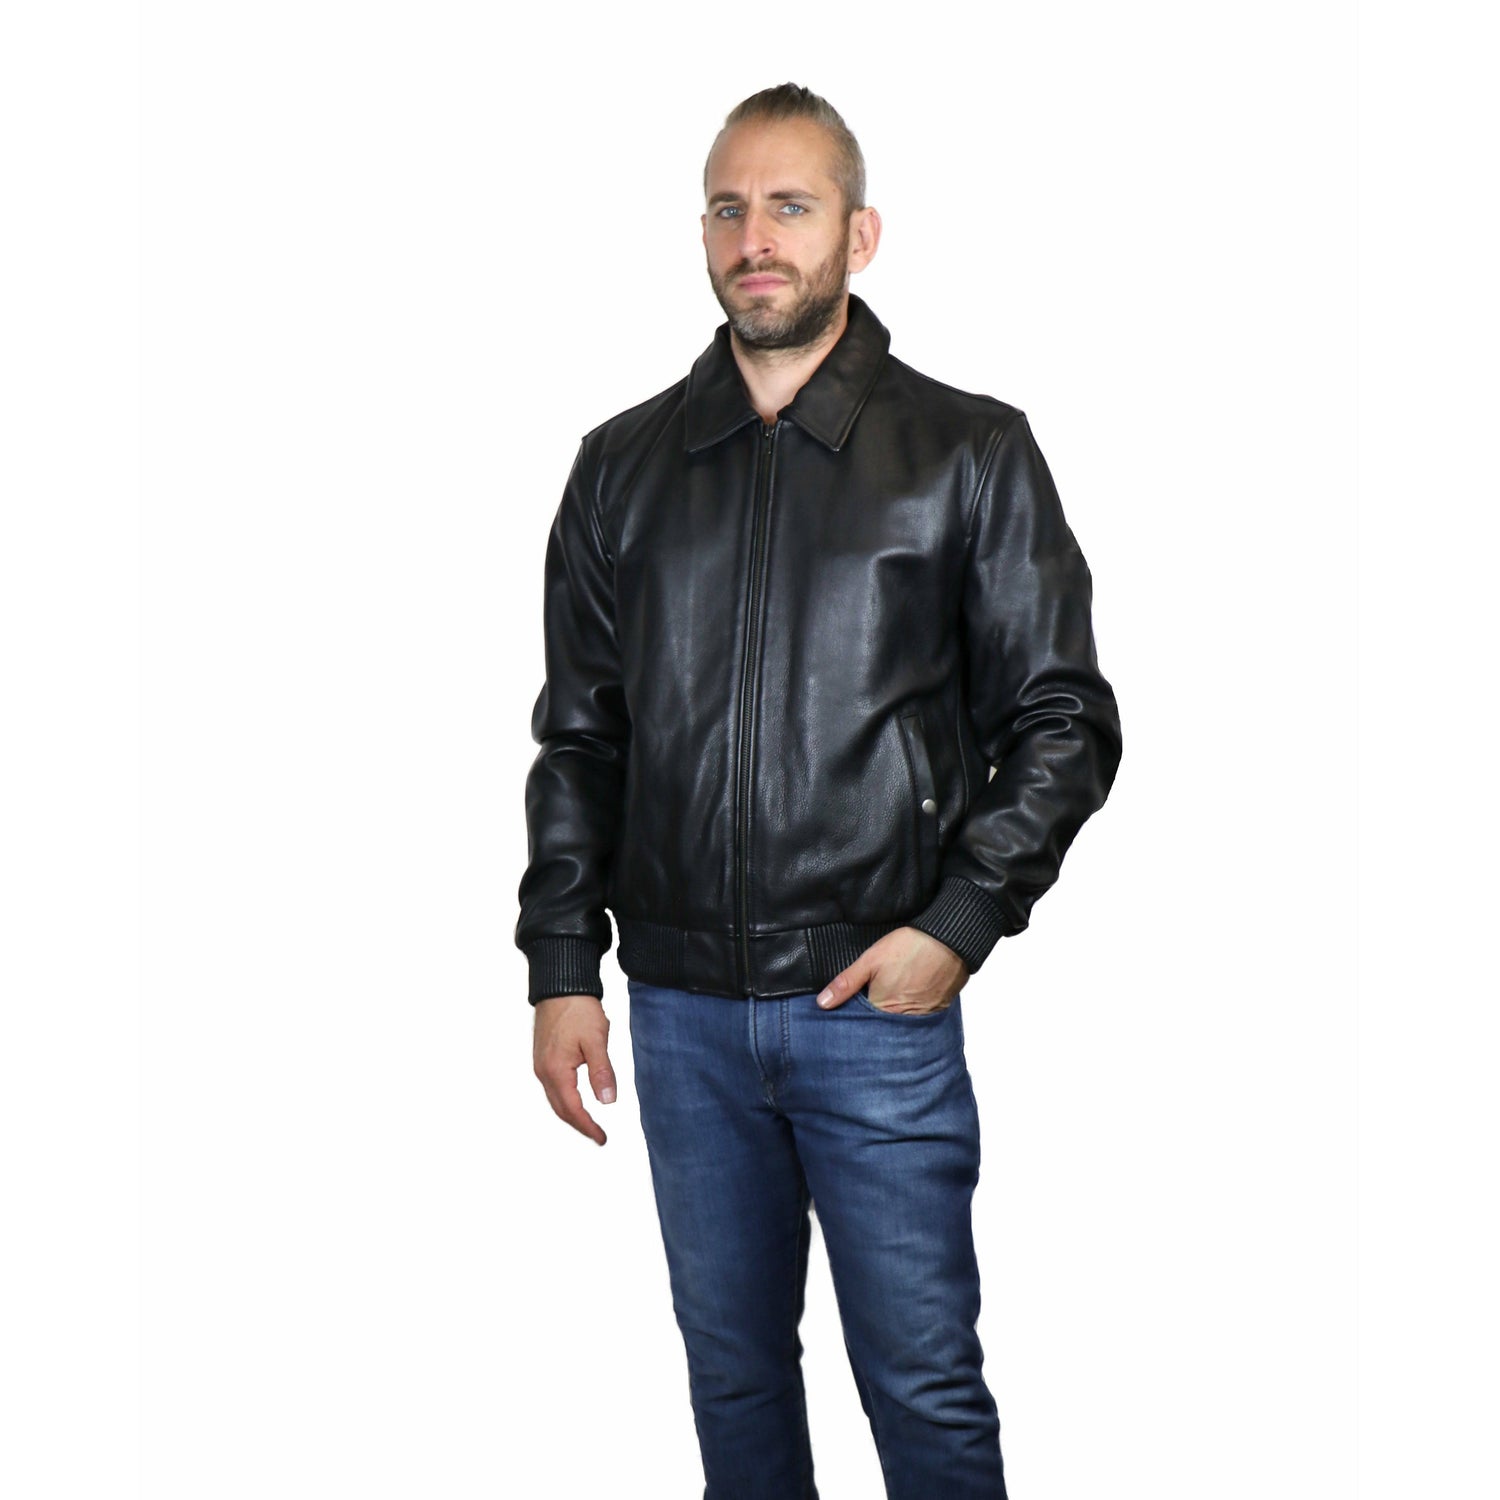 Whet Blu Men's Cowhide Leather Bomber Jacket - Zooloo Leather